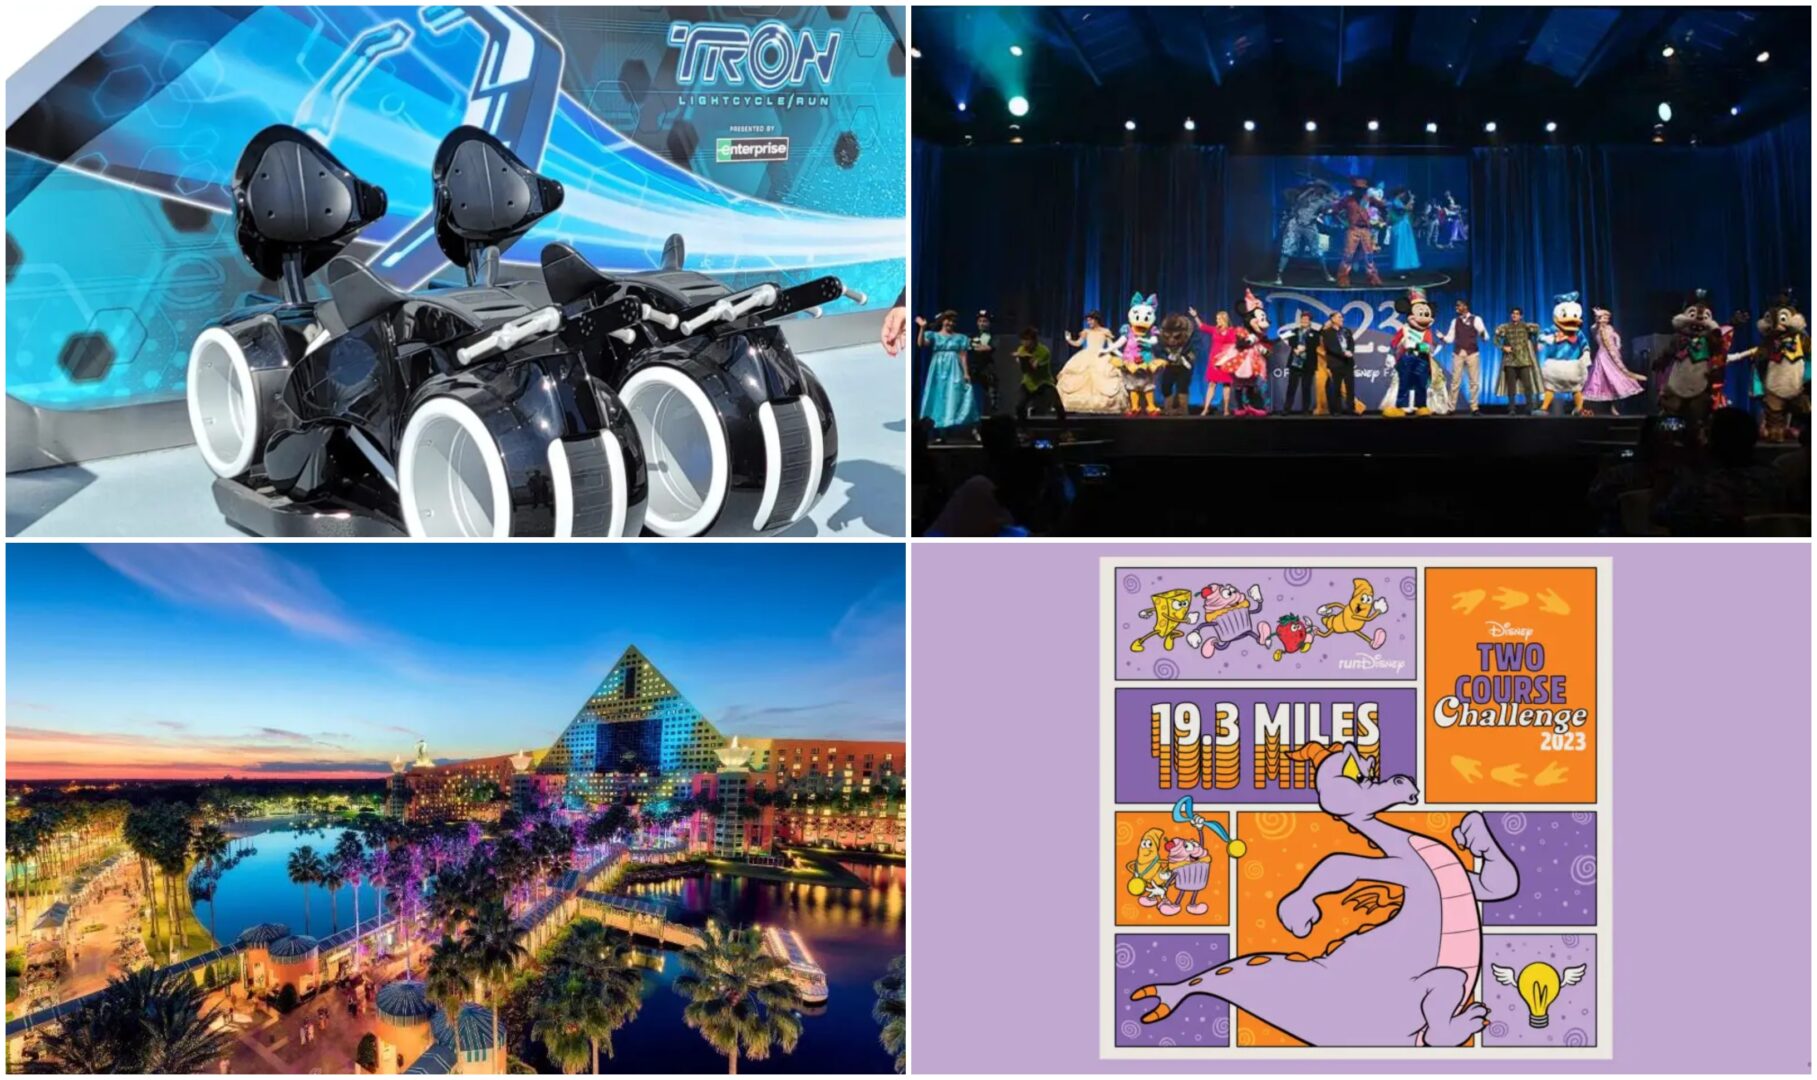 Disney News Highlights: Disney Takes over SXSW, Characters Revealed for RunDisney Wine & Dine 2023, DestinationD23 Dates and Tickets, Walt Disney World 50th Anniversary is Ending